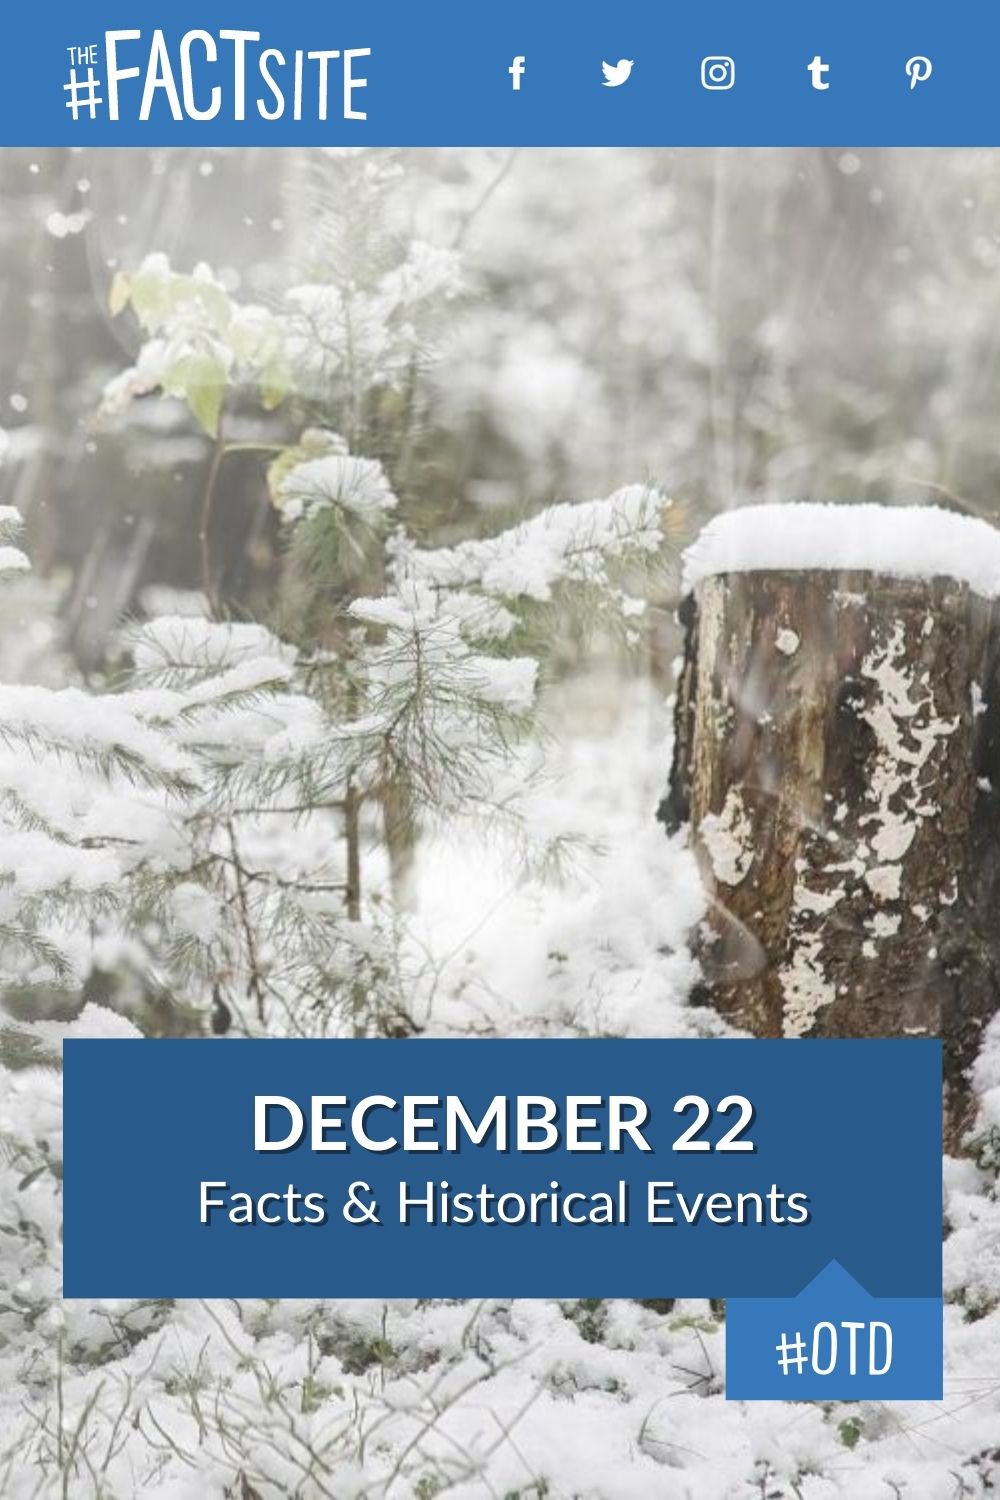 December 22: Facts & Historical Events On This Day